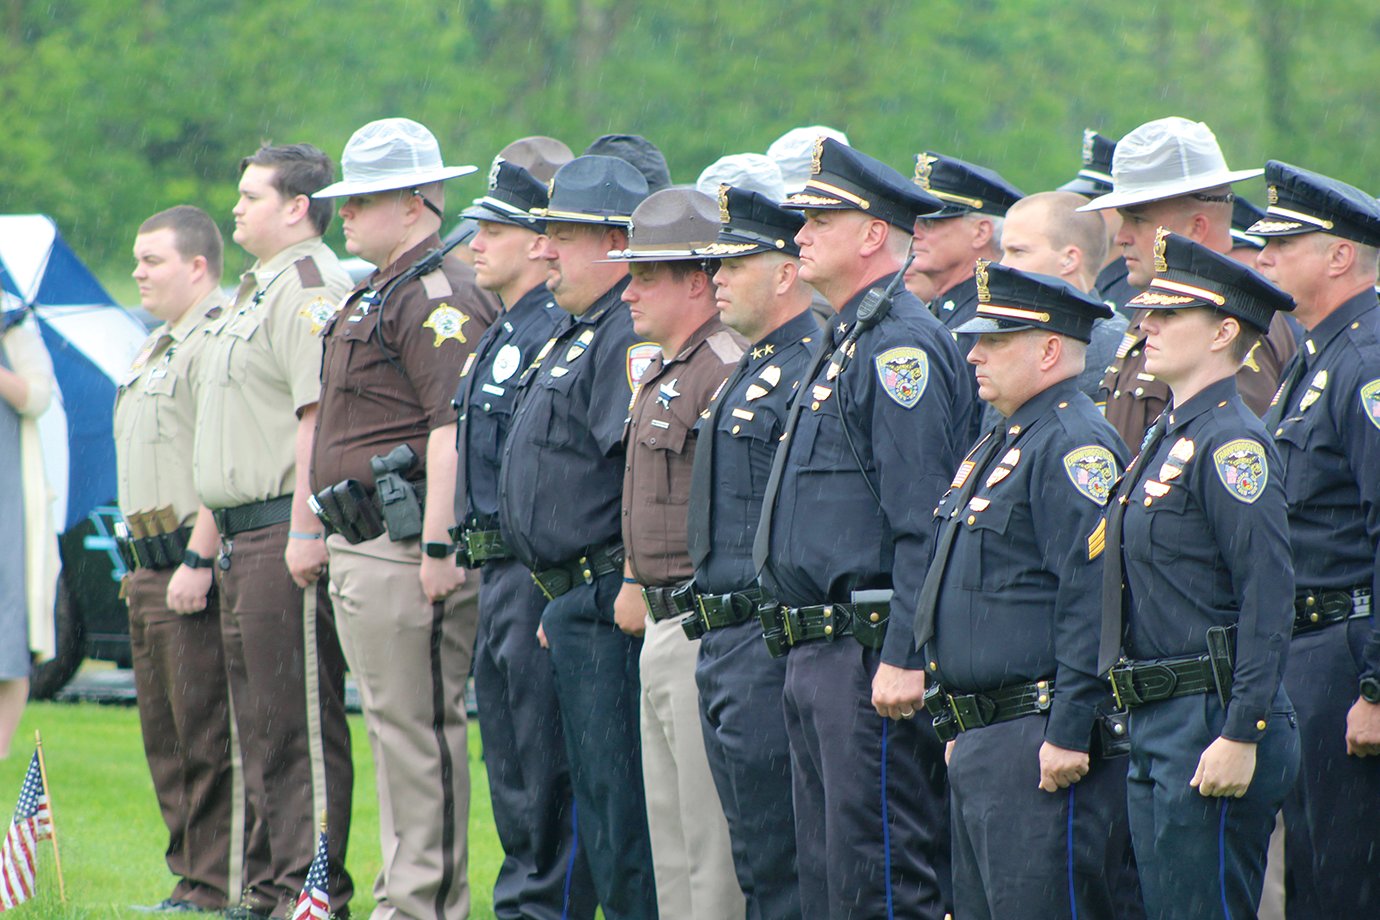 Officers and deputies from all branches of Montgomery County law enforcement honor the lives and service of fallen officers Lt. Russell Baldwin, Marshal Lesley Oaks and Marshal Mark Clapp Wednesday at Oak Hill and New Richmond cemeteries. The annual event has become a opportunity for county residents to honor all men and women who have paid the ultimate sacrifice for the public